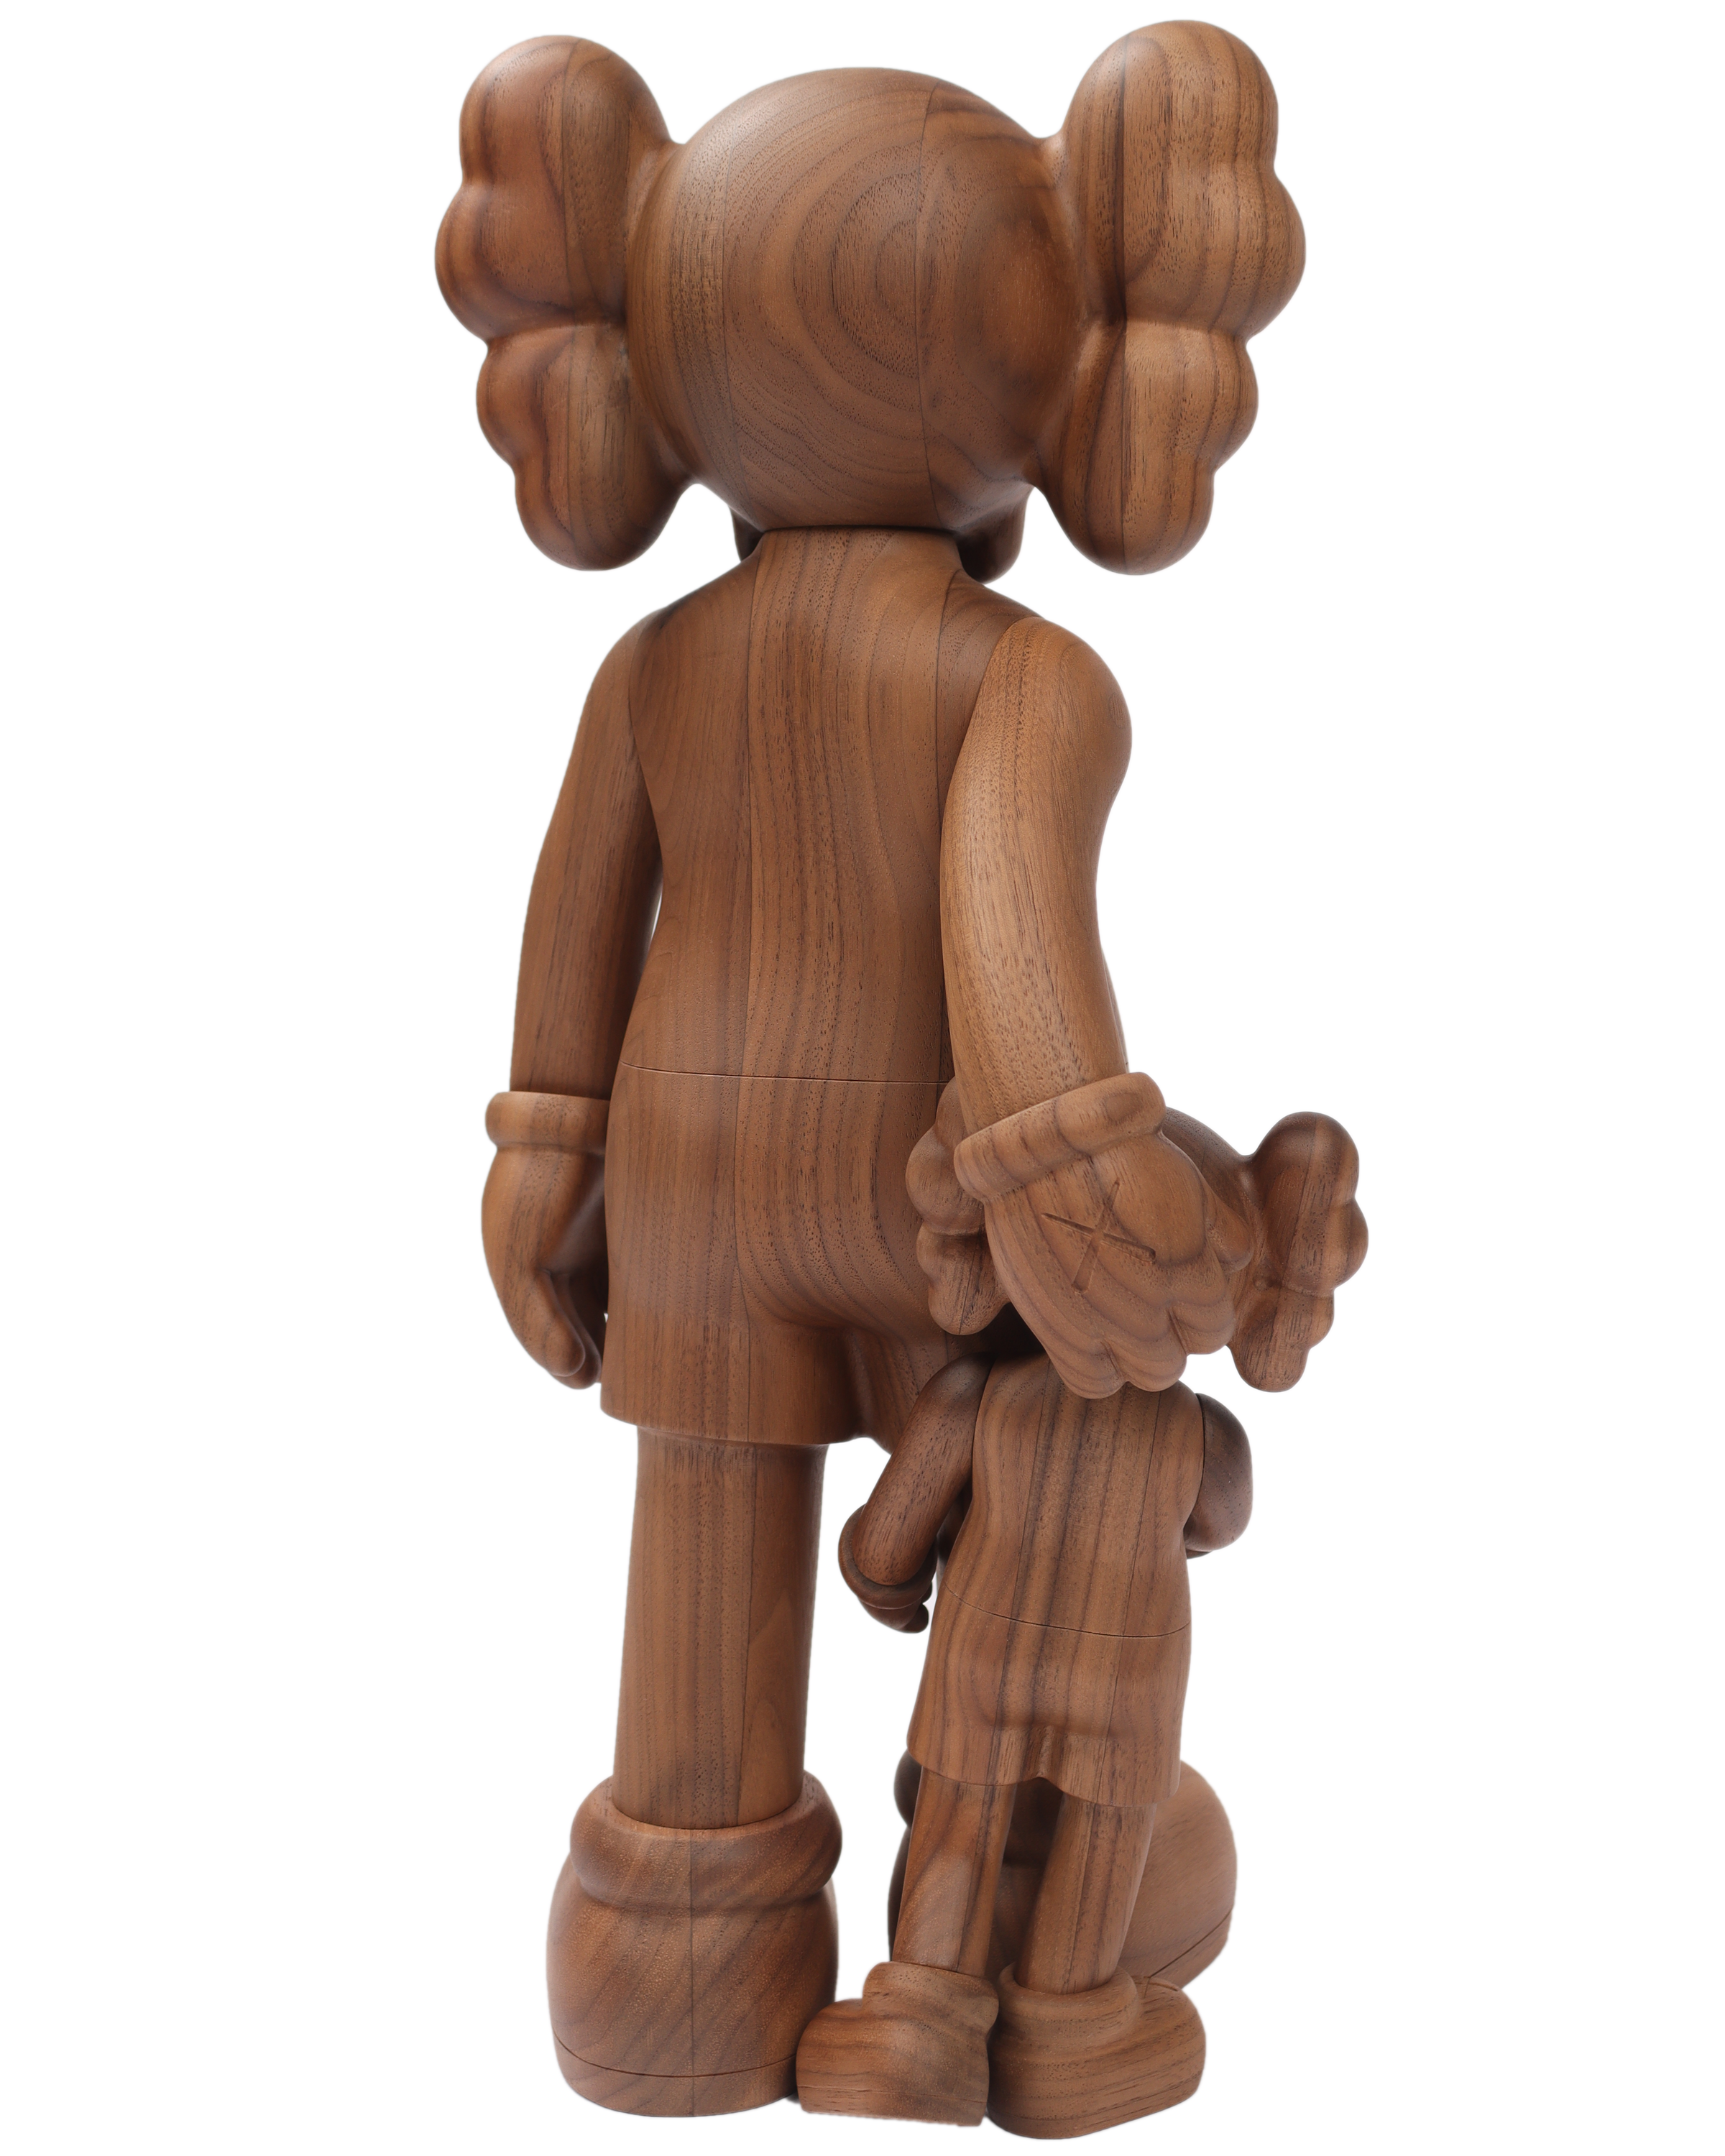 "Good Intentions" Wooden Figure (Signed, Edition of 100)